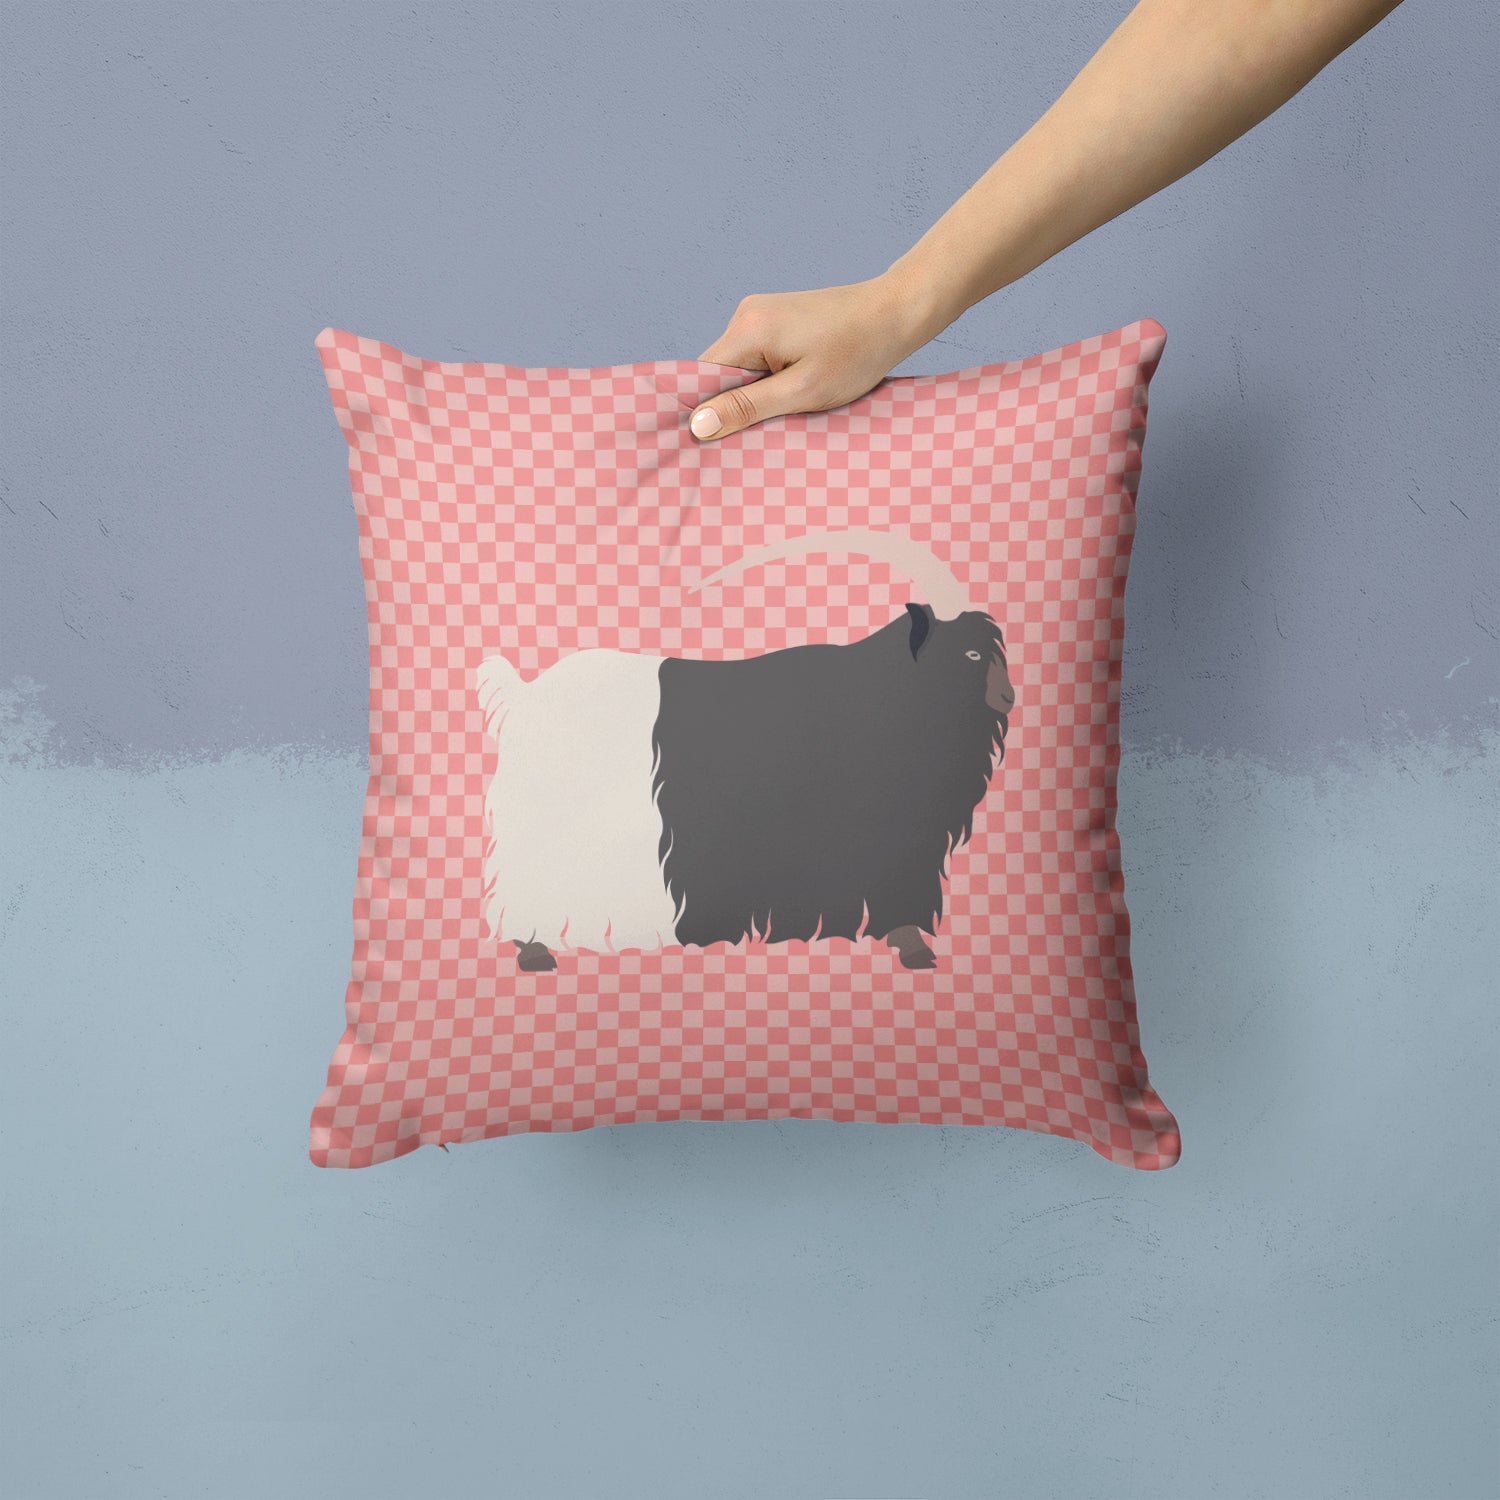 Welsh Black-Necked Goat Pink Check Fabric Decorative Pillow BB7887PW1414 - the-store.com